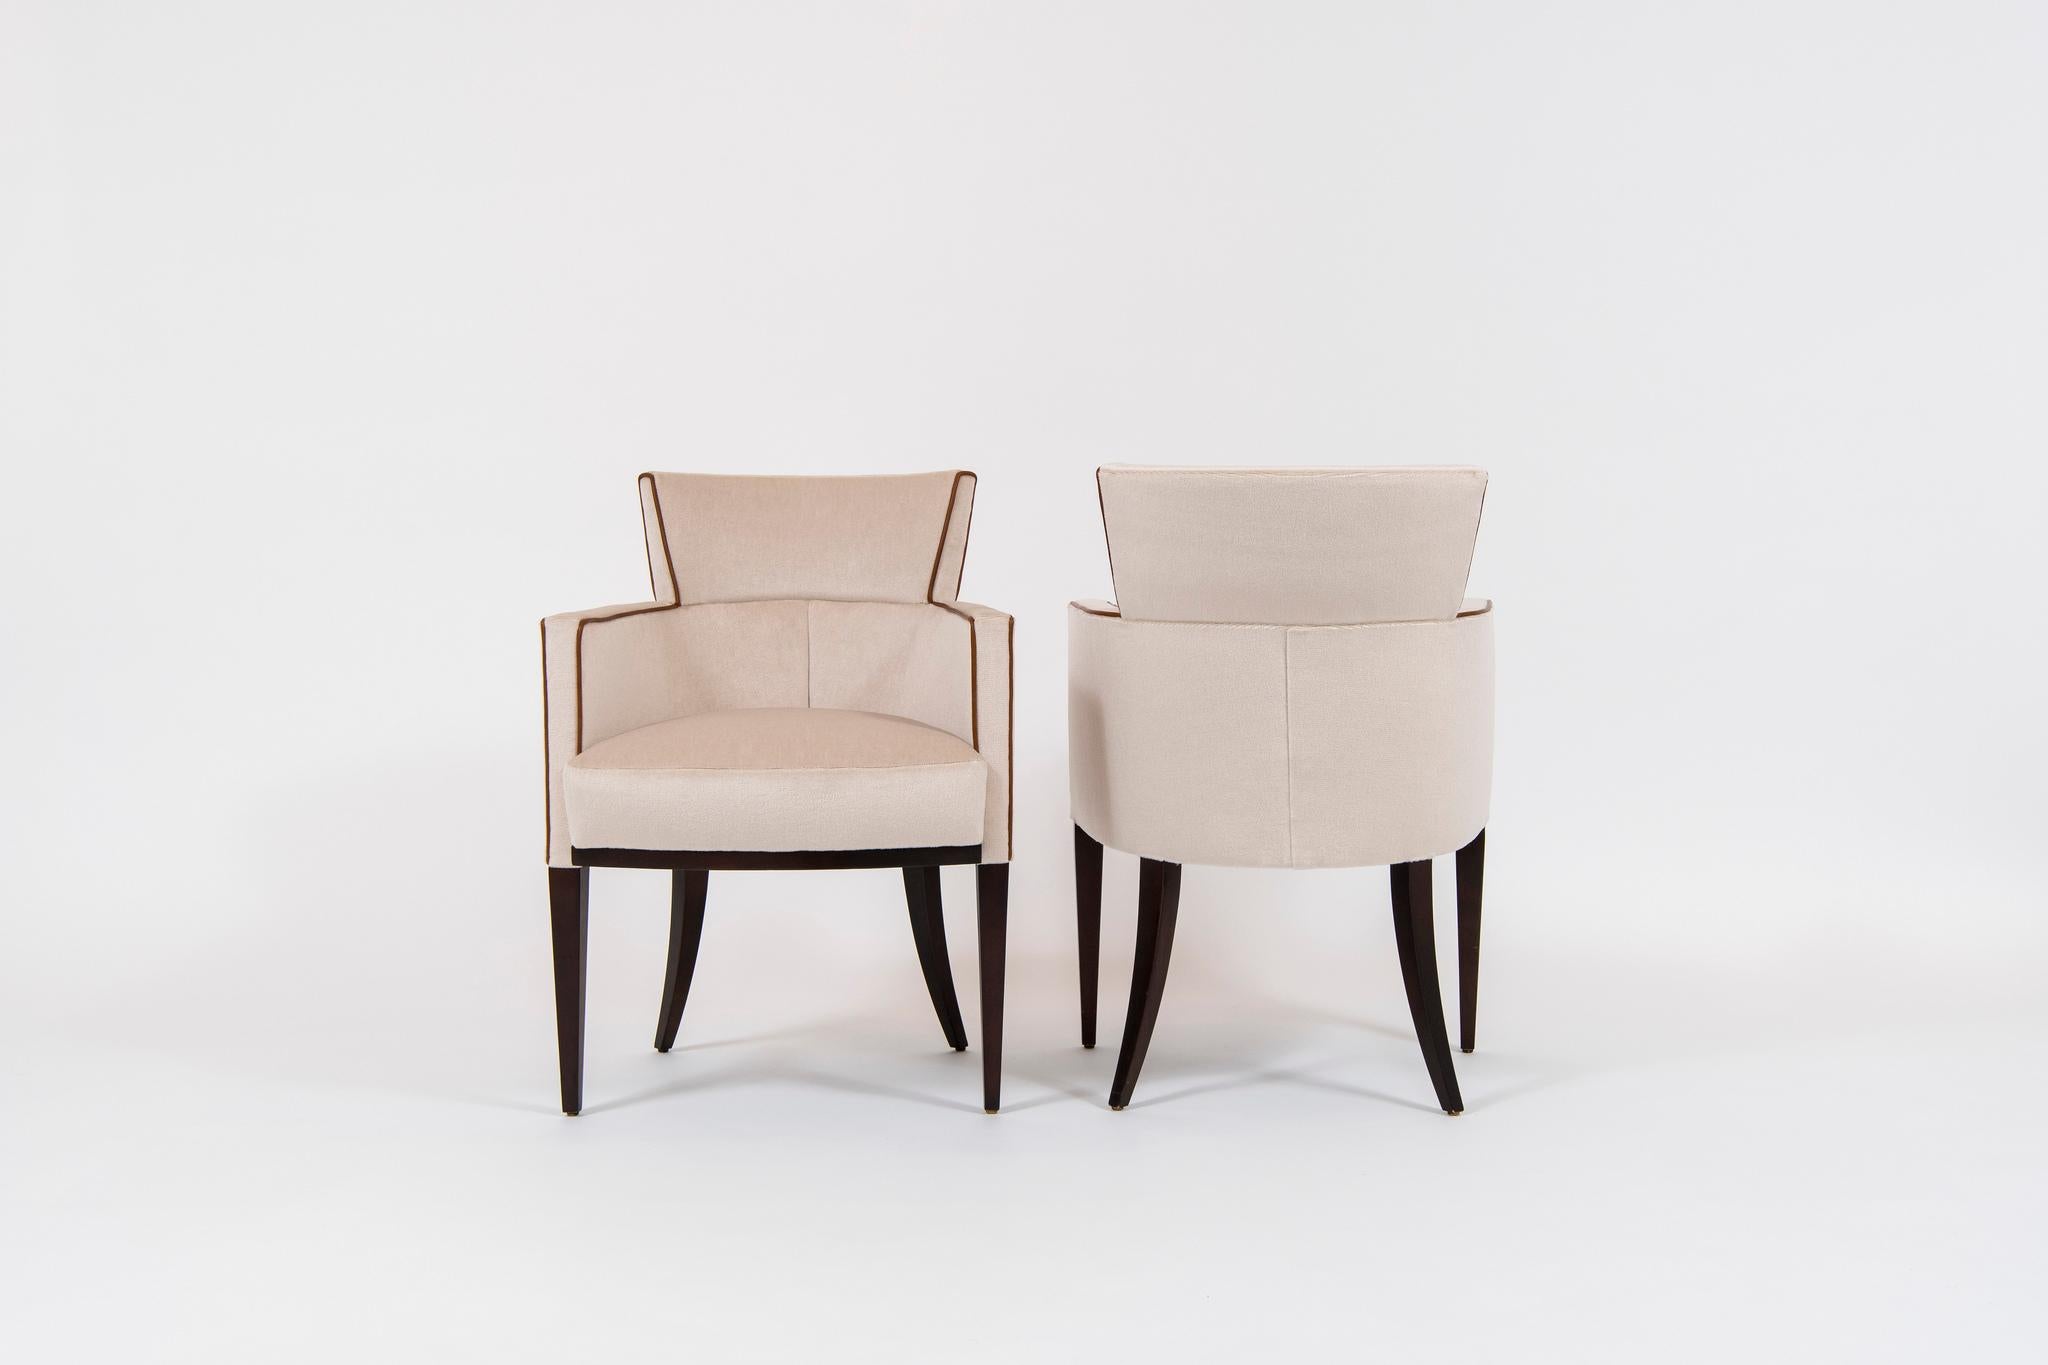 A pair of David Edward Gotham armchairs designed by Roger Crowley. These solid hardwood maple frame construction chairs are newly upholstered in an ecru Mohair silk velvet with an Italian cognac colored leather cord. 

